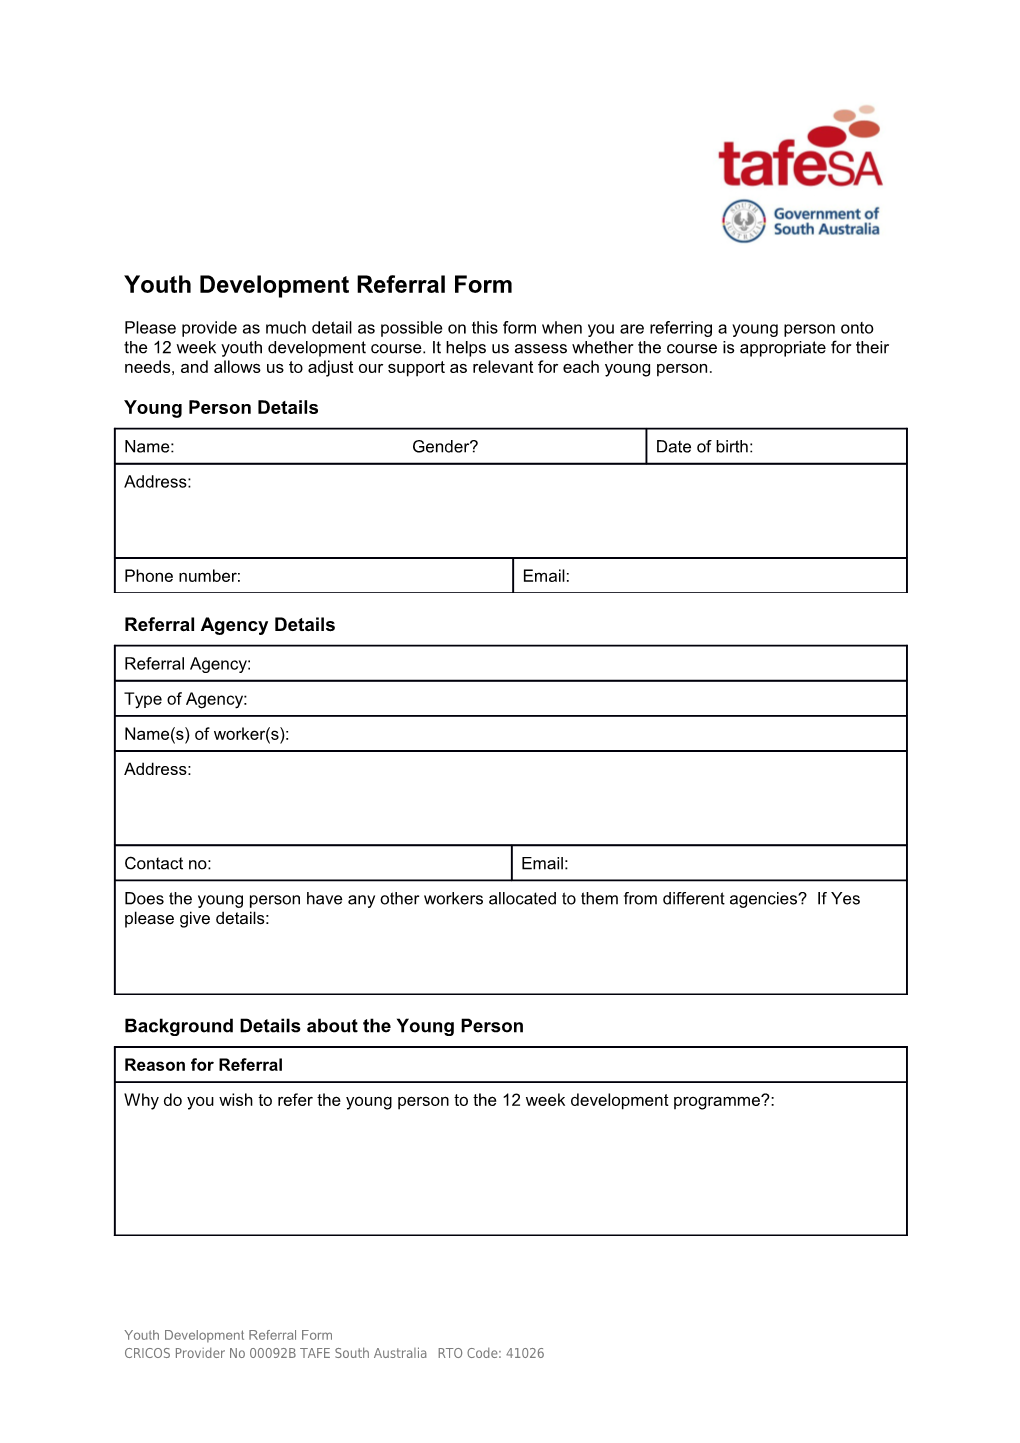 Youth Development Referral Form